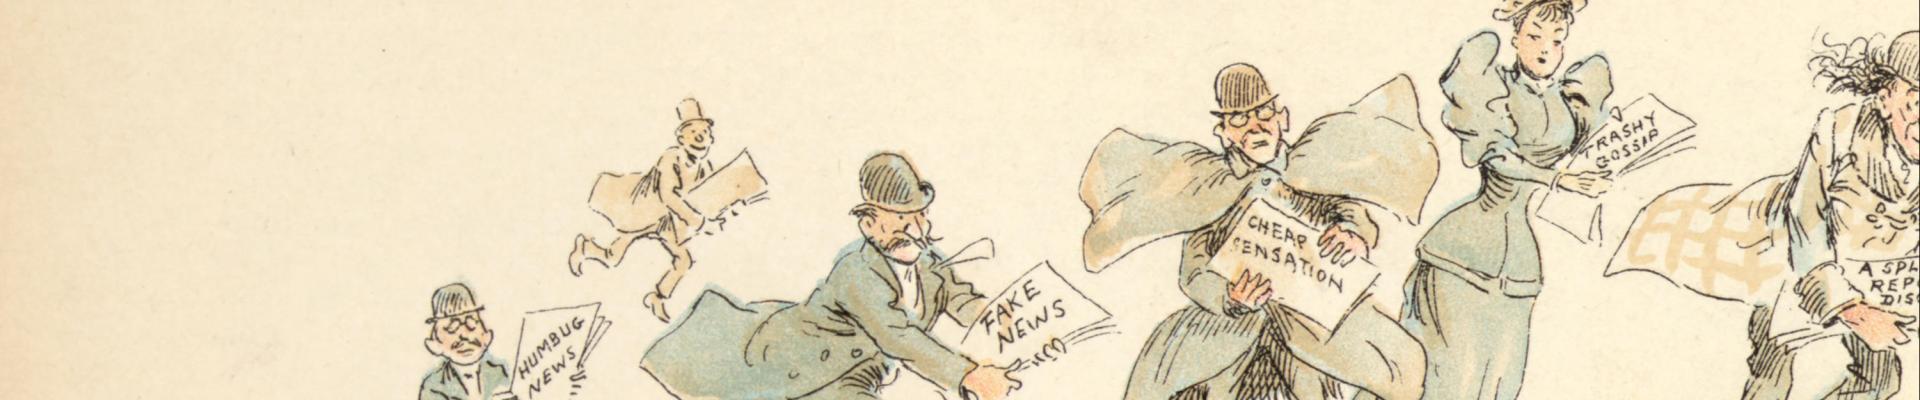 Detail from The Fin de Siècle Newspaper Proprietor, an illustration featured in an 1894 issue of Puck magazine (source: Library of Congress)